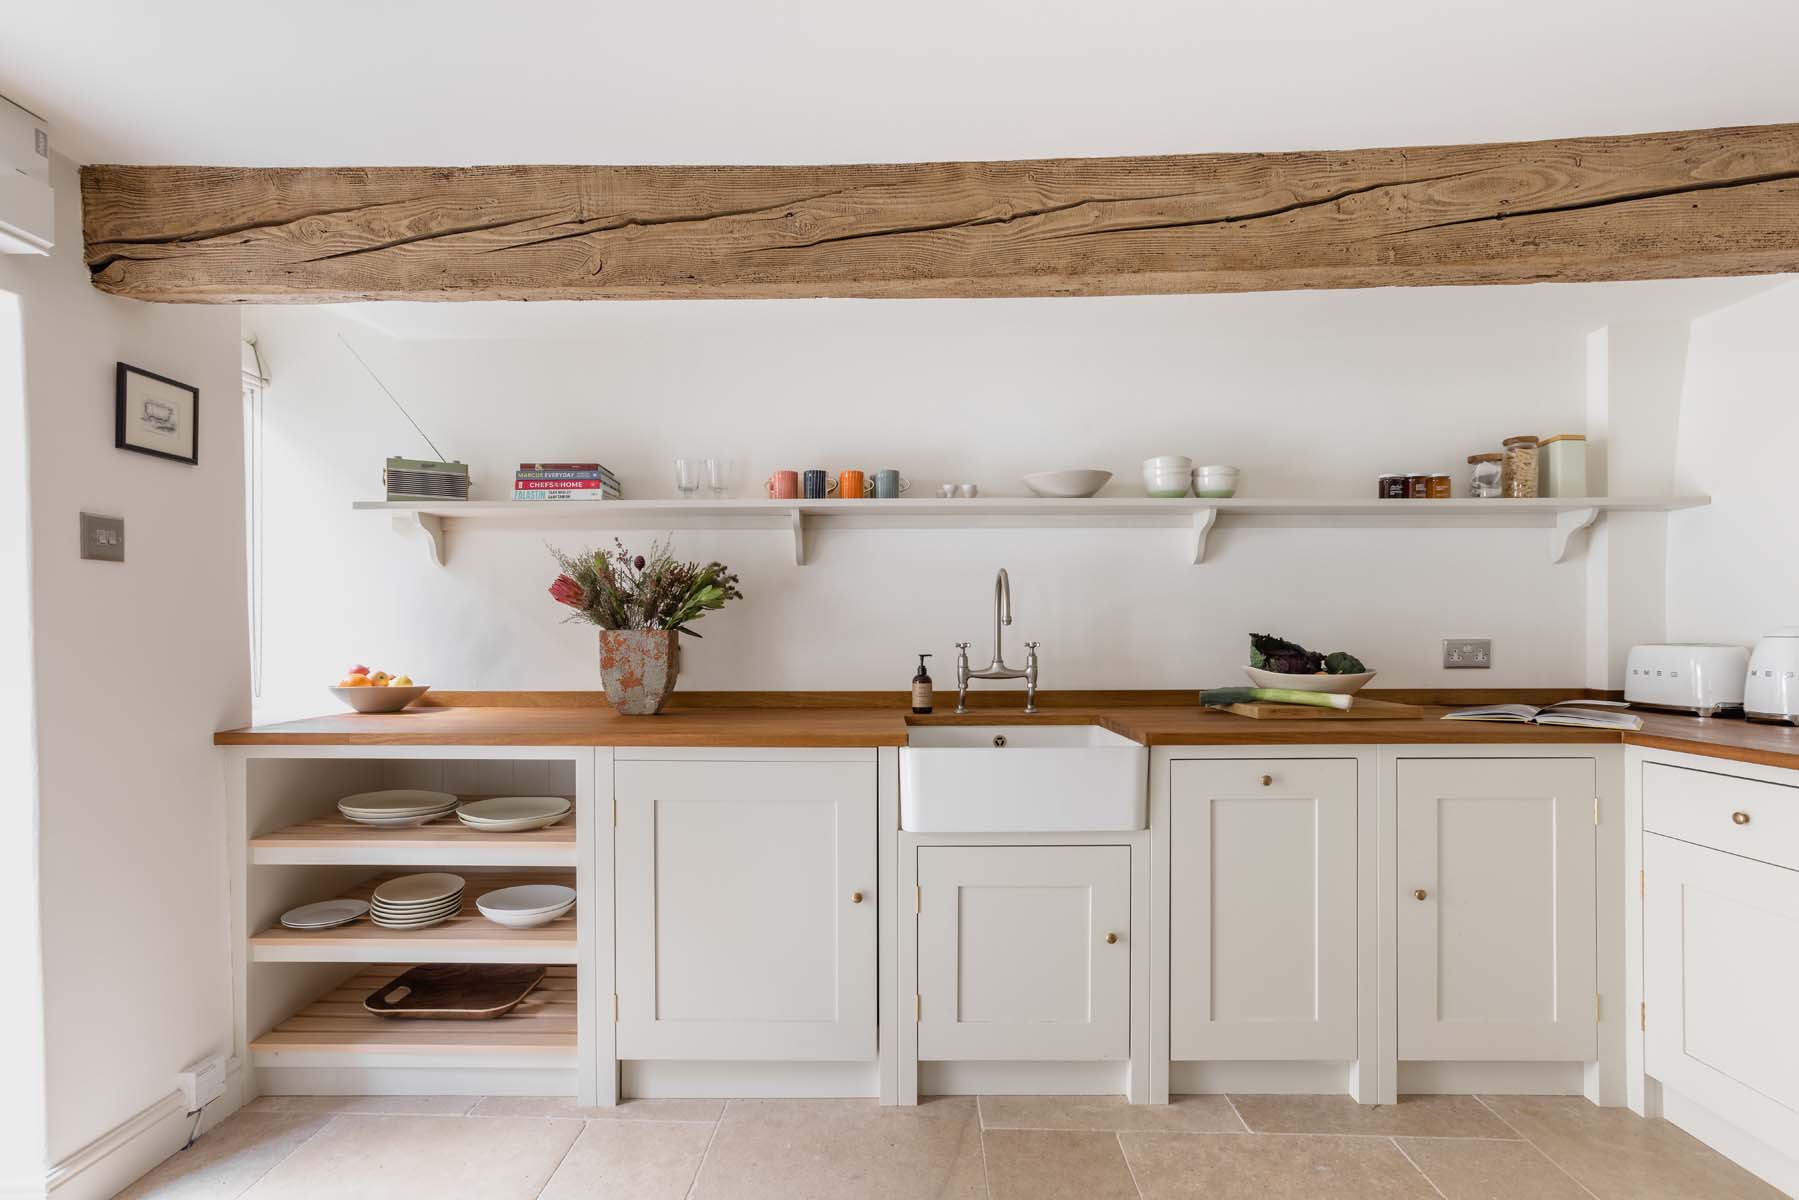 Minimal white shaker style cottage kitchen with wooden beams